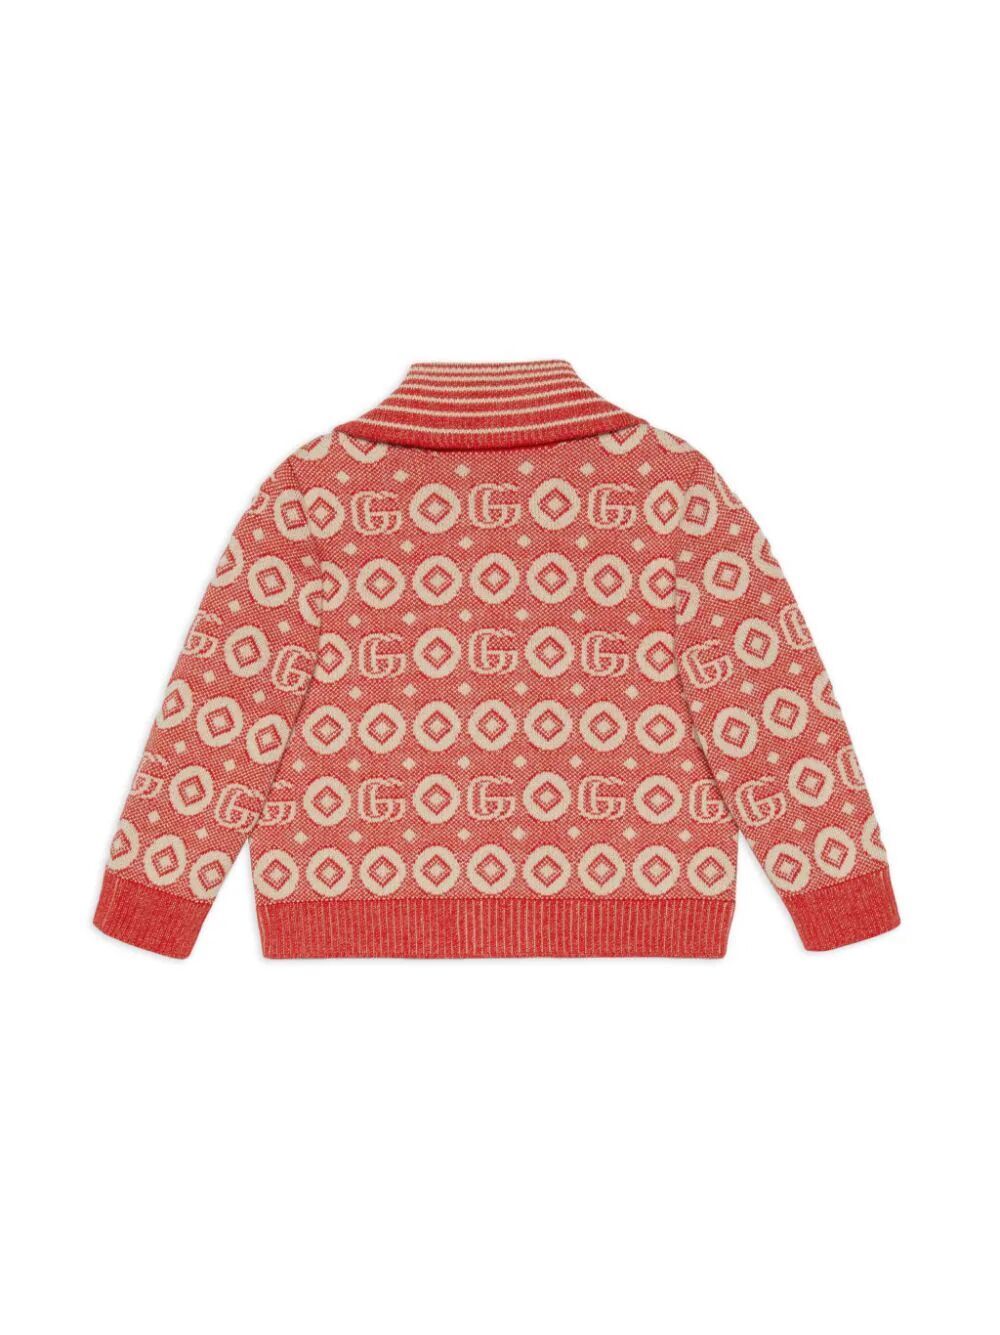 Shop Gucci Cardigan Cotton Jaquard In Red